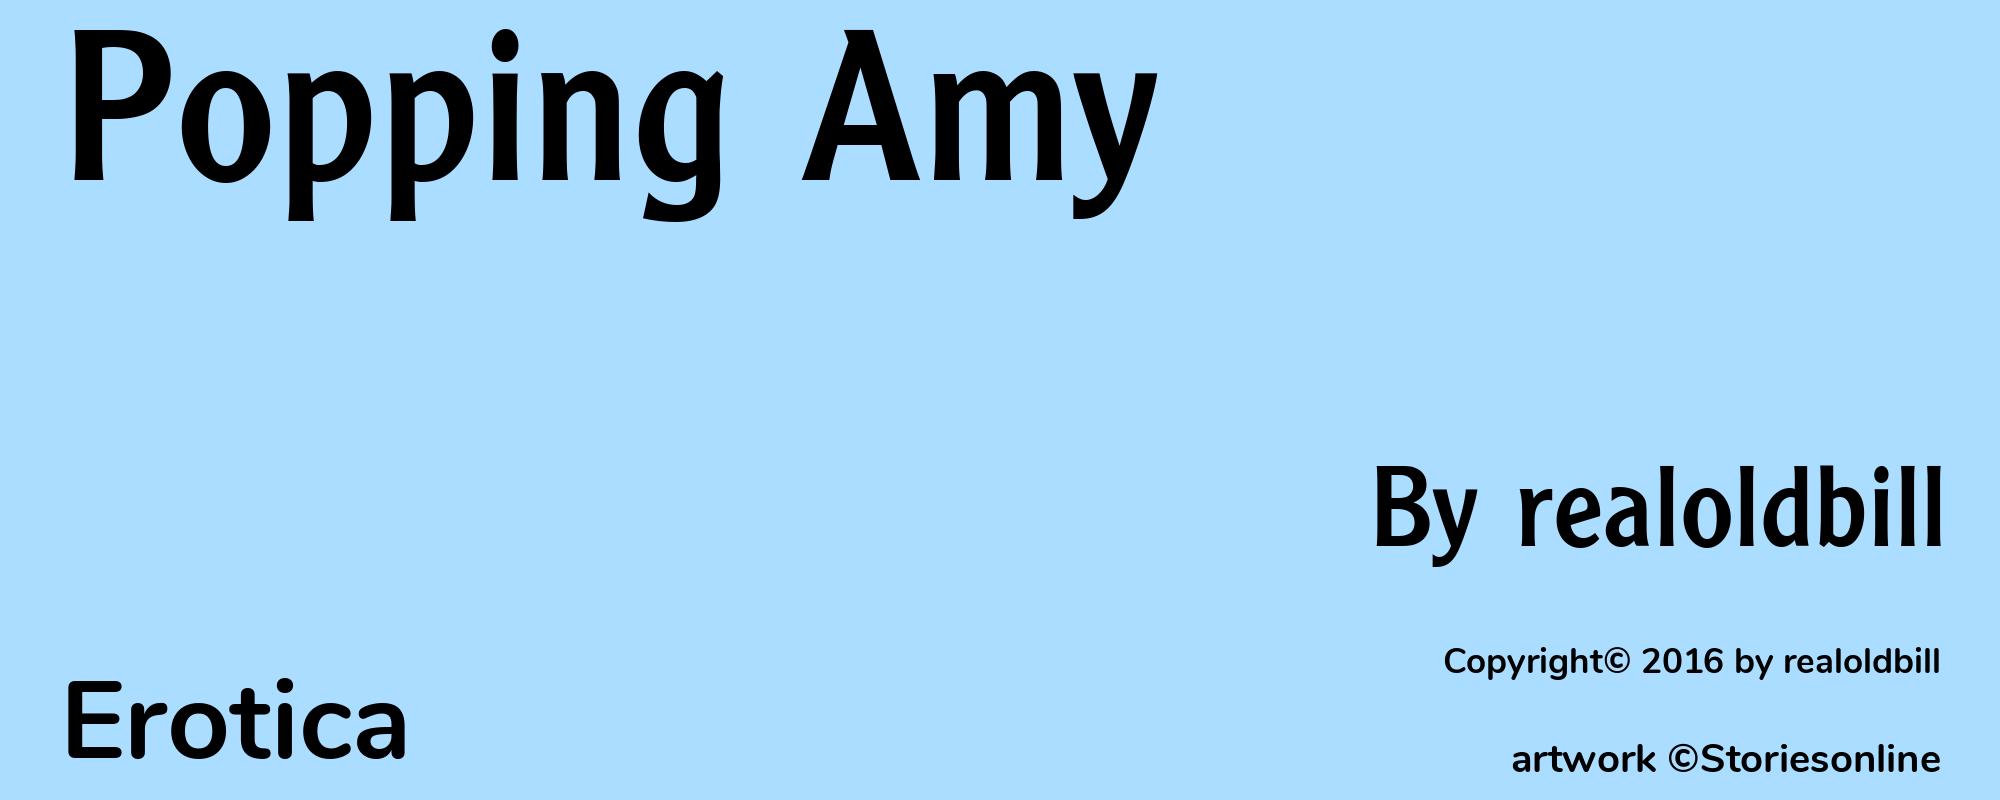 Popping Amy - Cover